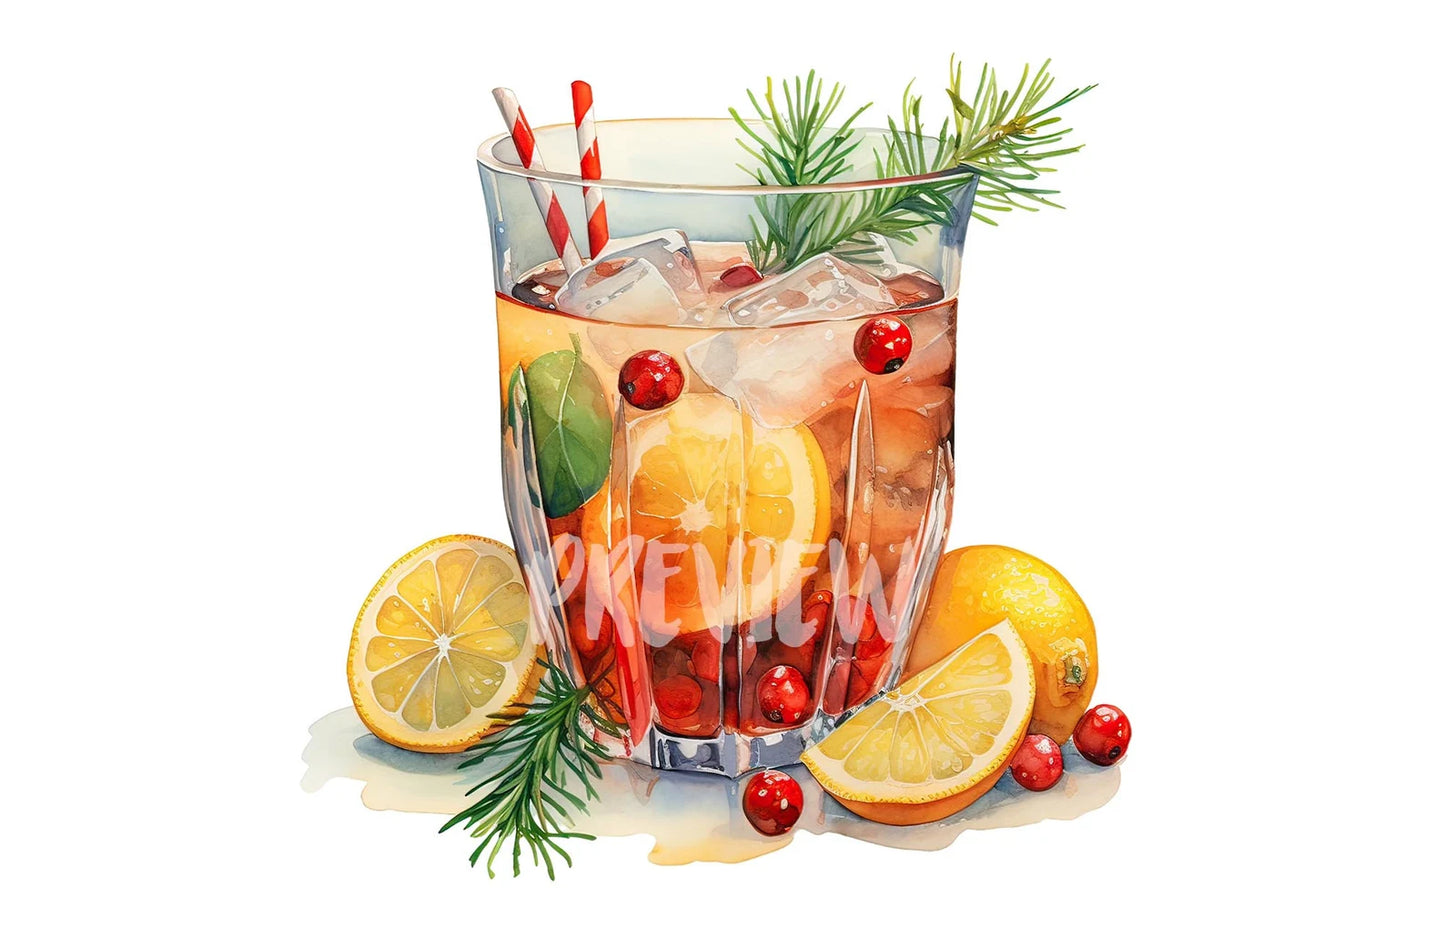 Watercolor Christmas punch illustration